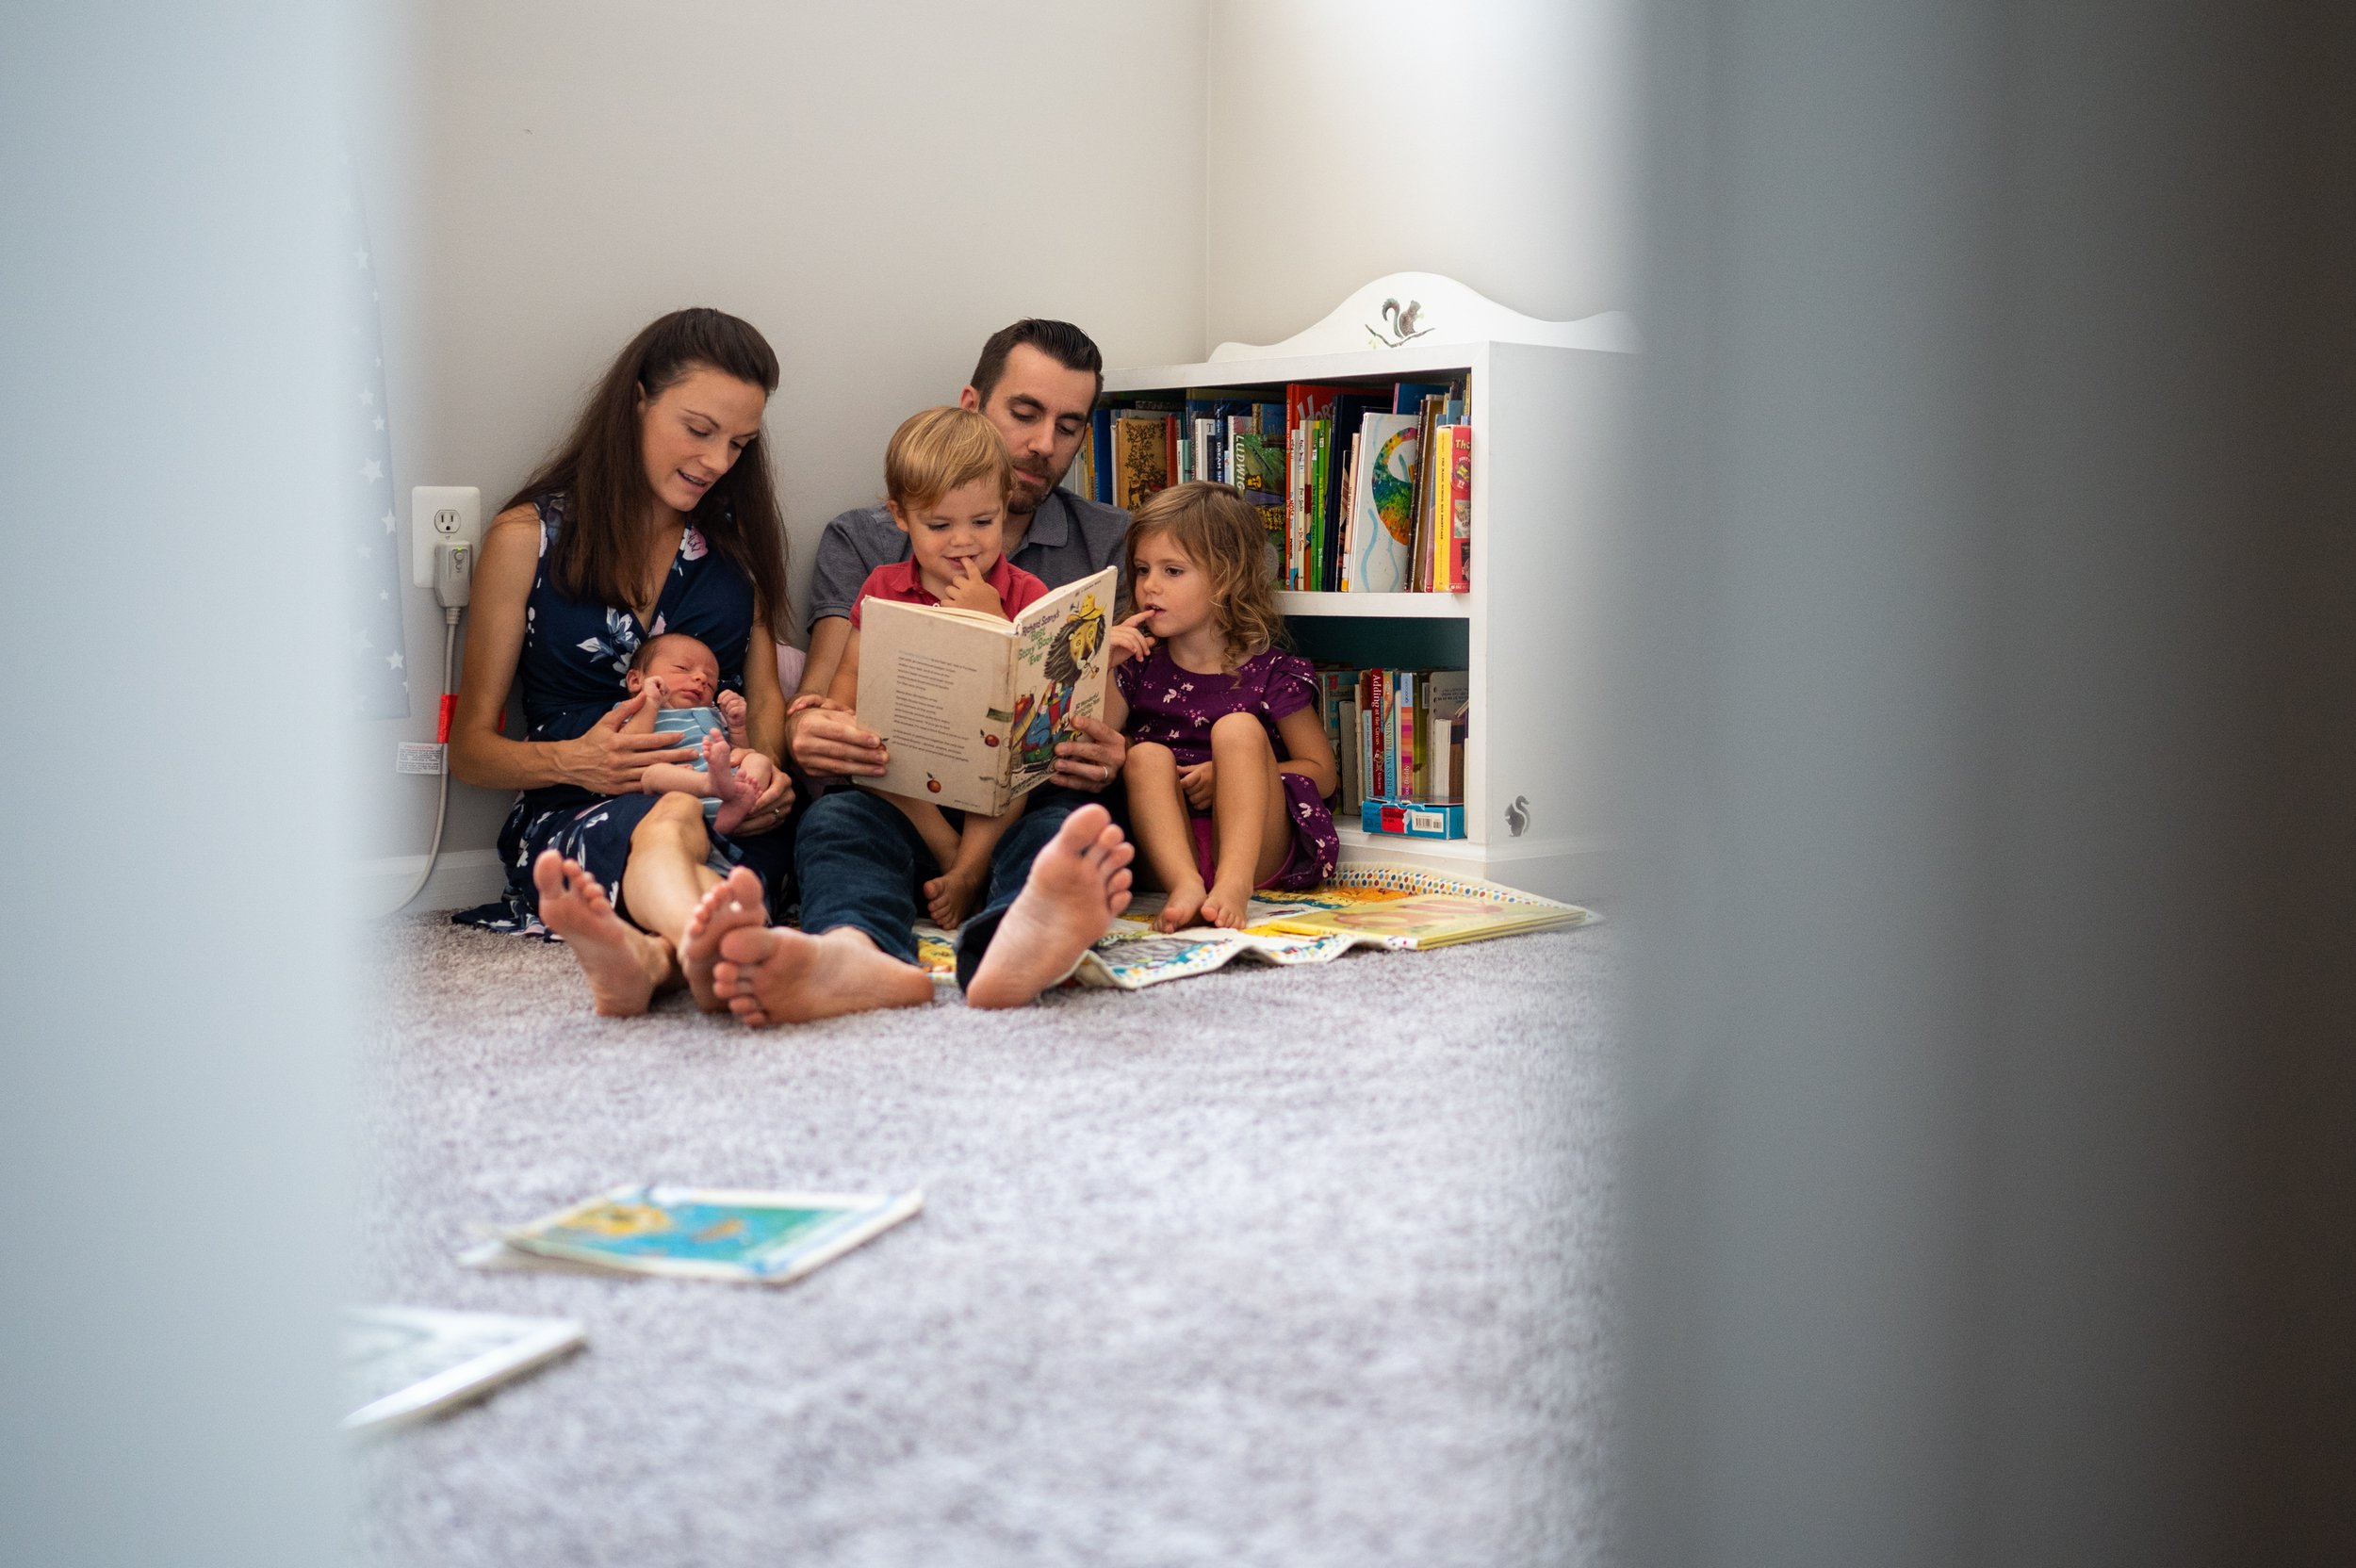   Megan Carroll (left) and Jesse Carroll (center) sit and read with their children in their home in Gloucester City, N.J. on Aug. 27, 2020.   